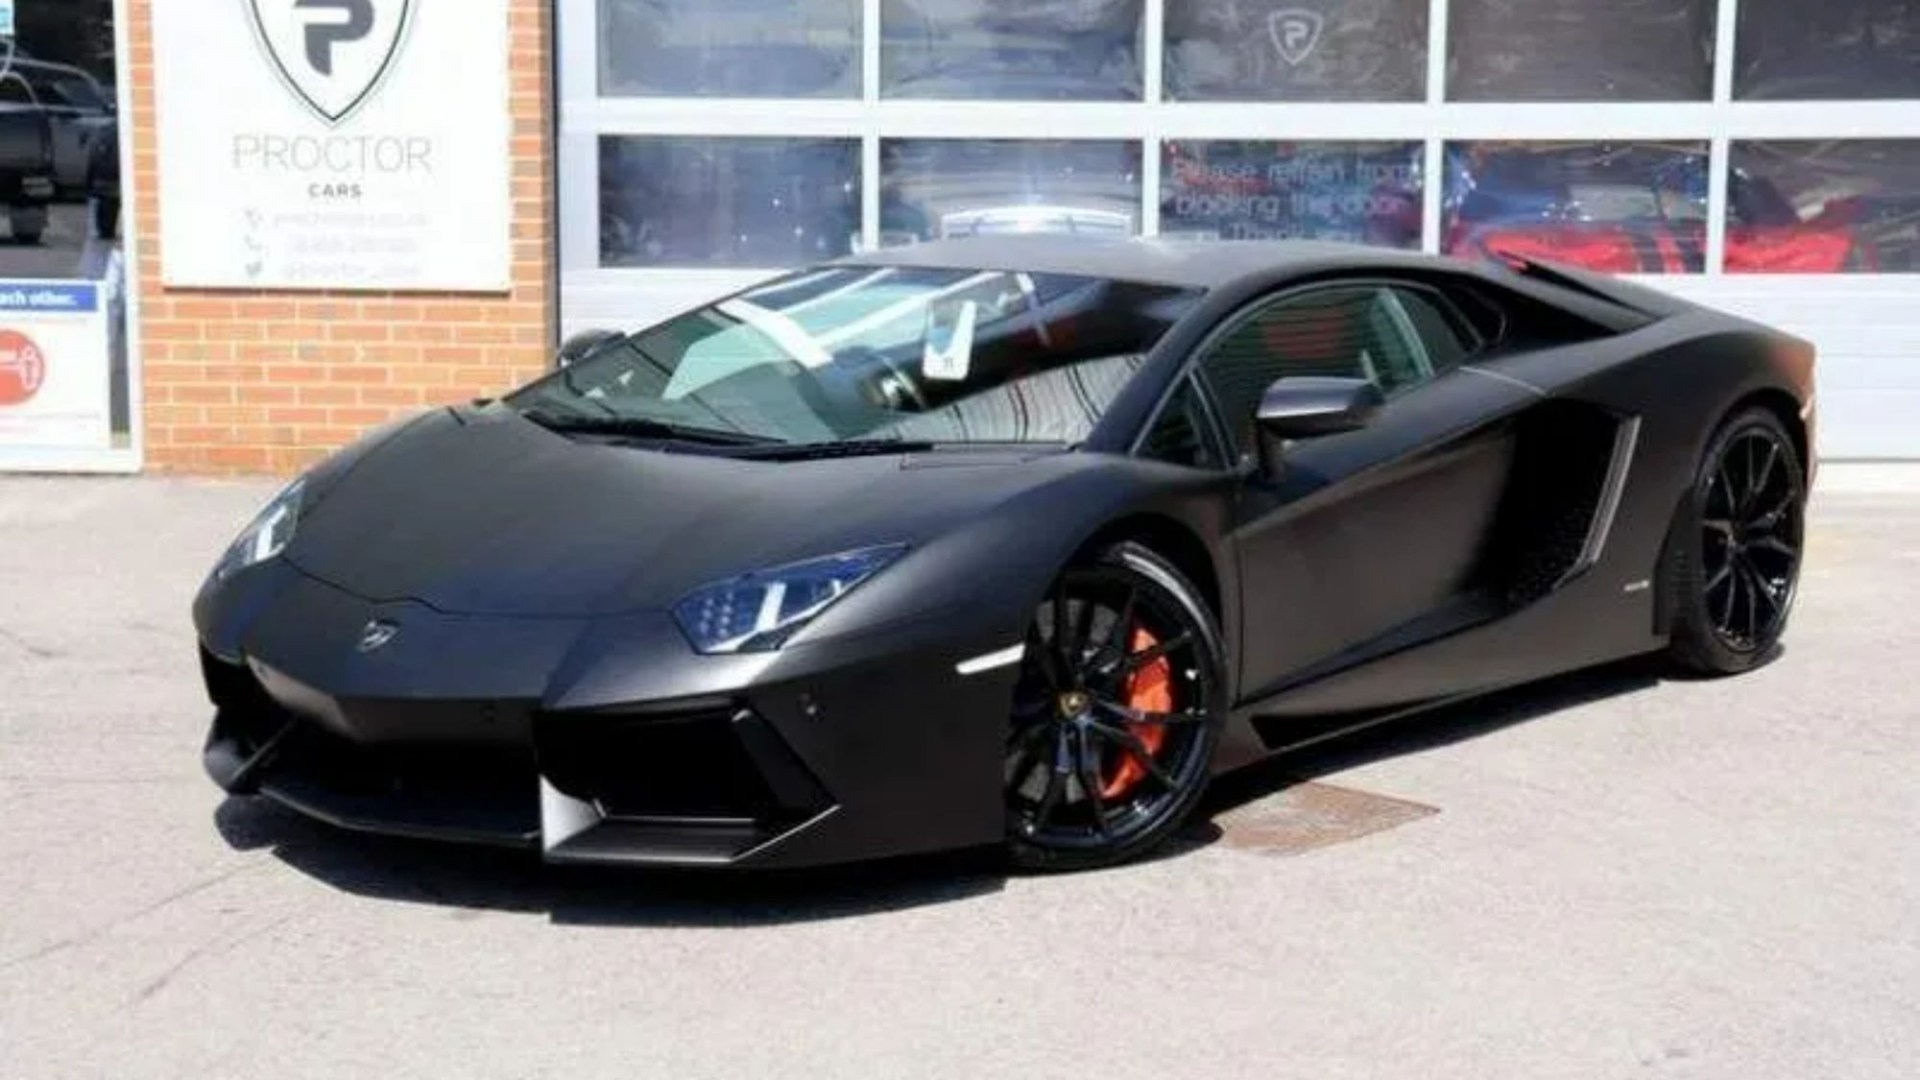 I'm an ex-Premier League star - I don't know why the f*** I bought a £360k Lamborghini... it just gathered cobwebs